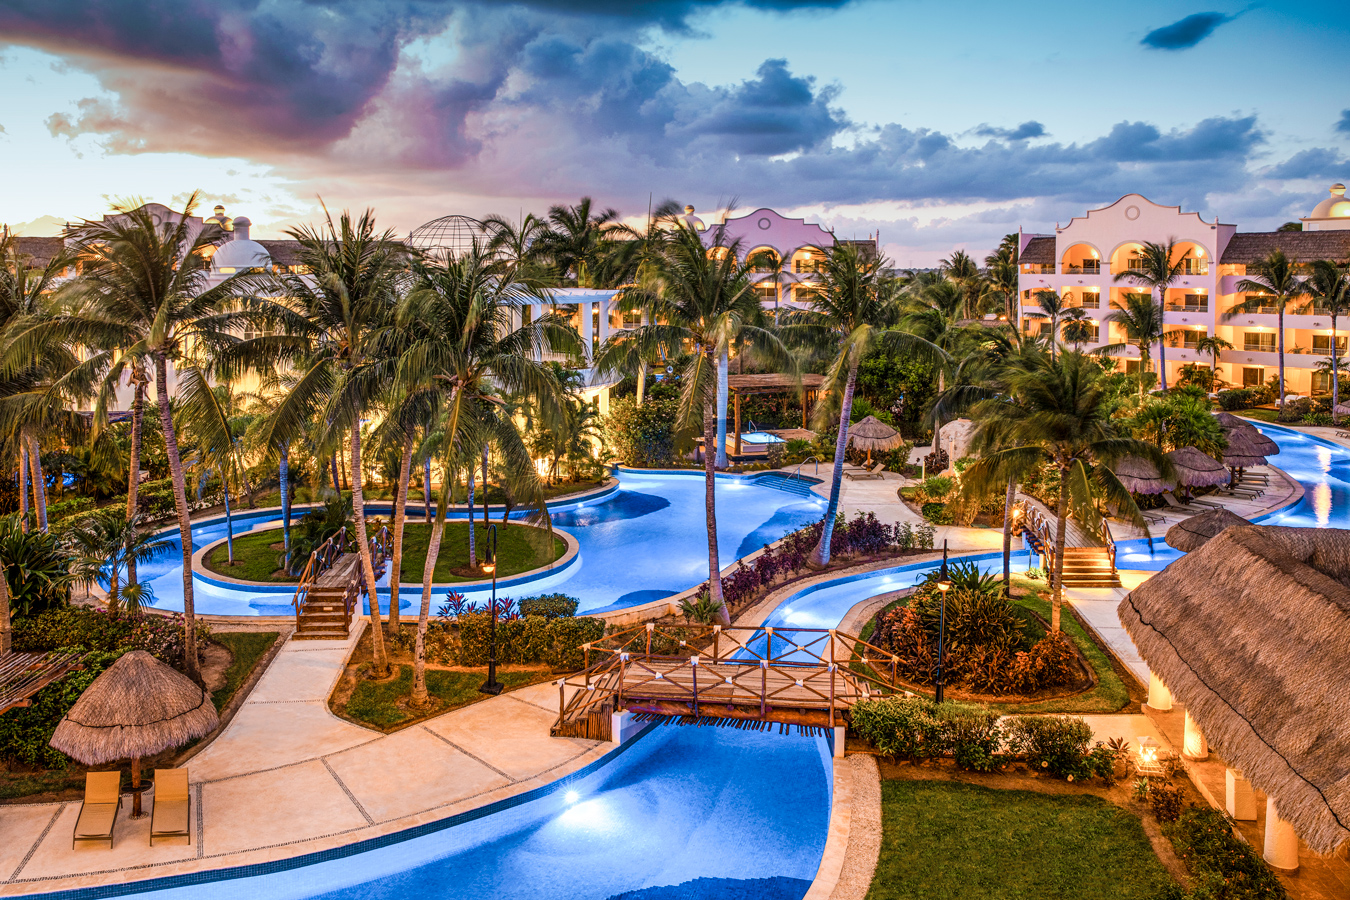 One of the best resorts in the world is located in the Riviera maya